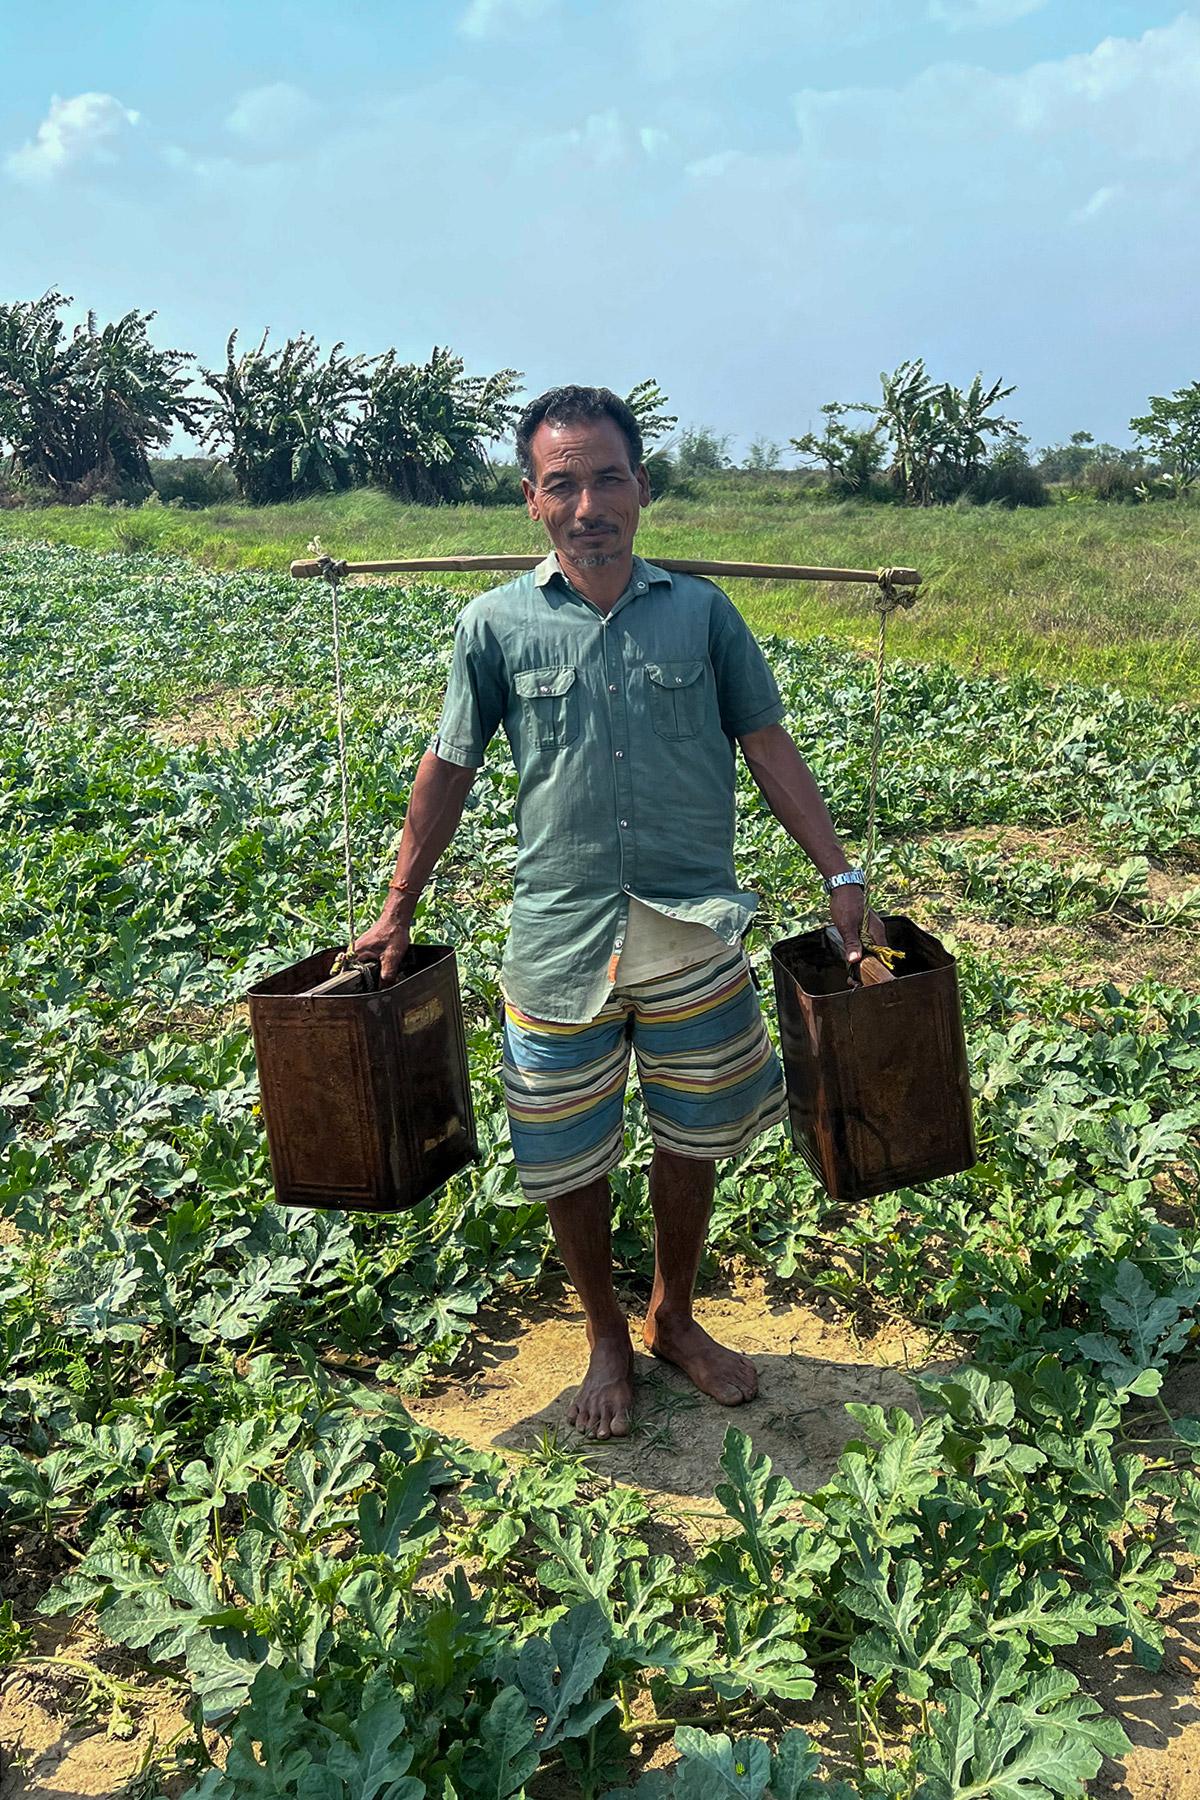 A farmer in Morang district showing labor-intensive irrigation in riverbed farming. Photo: LWF/ S. Muis